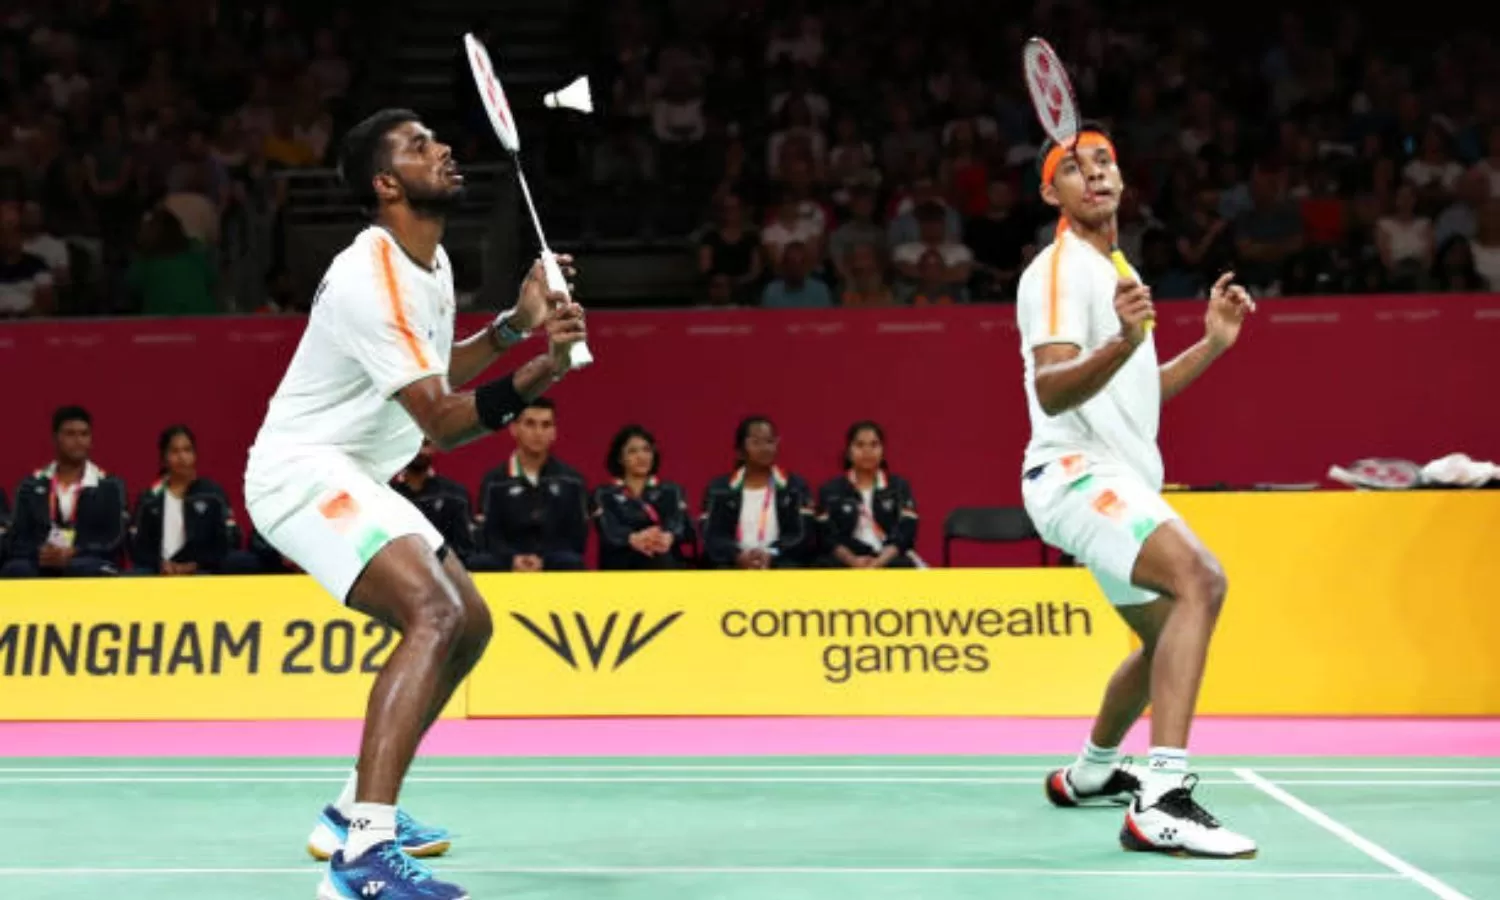 World number 1 Satwik/Chirag stunned in pre-quarters